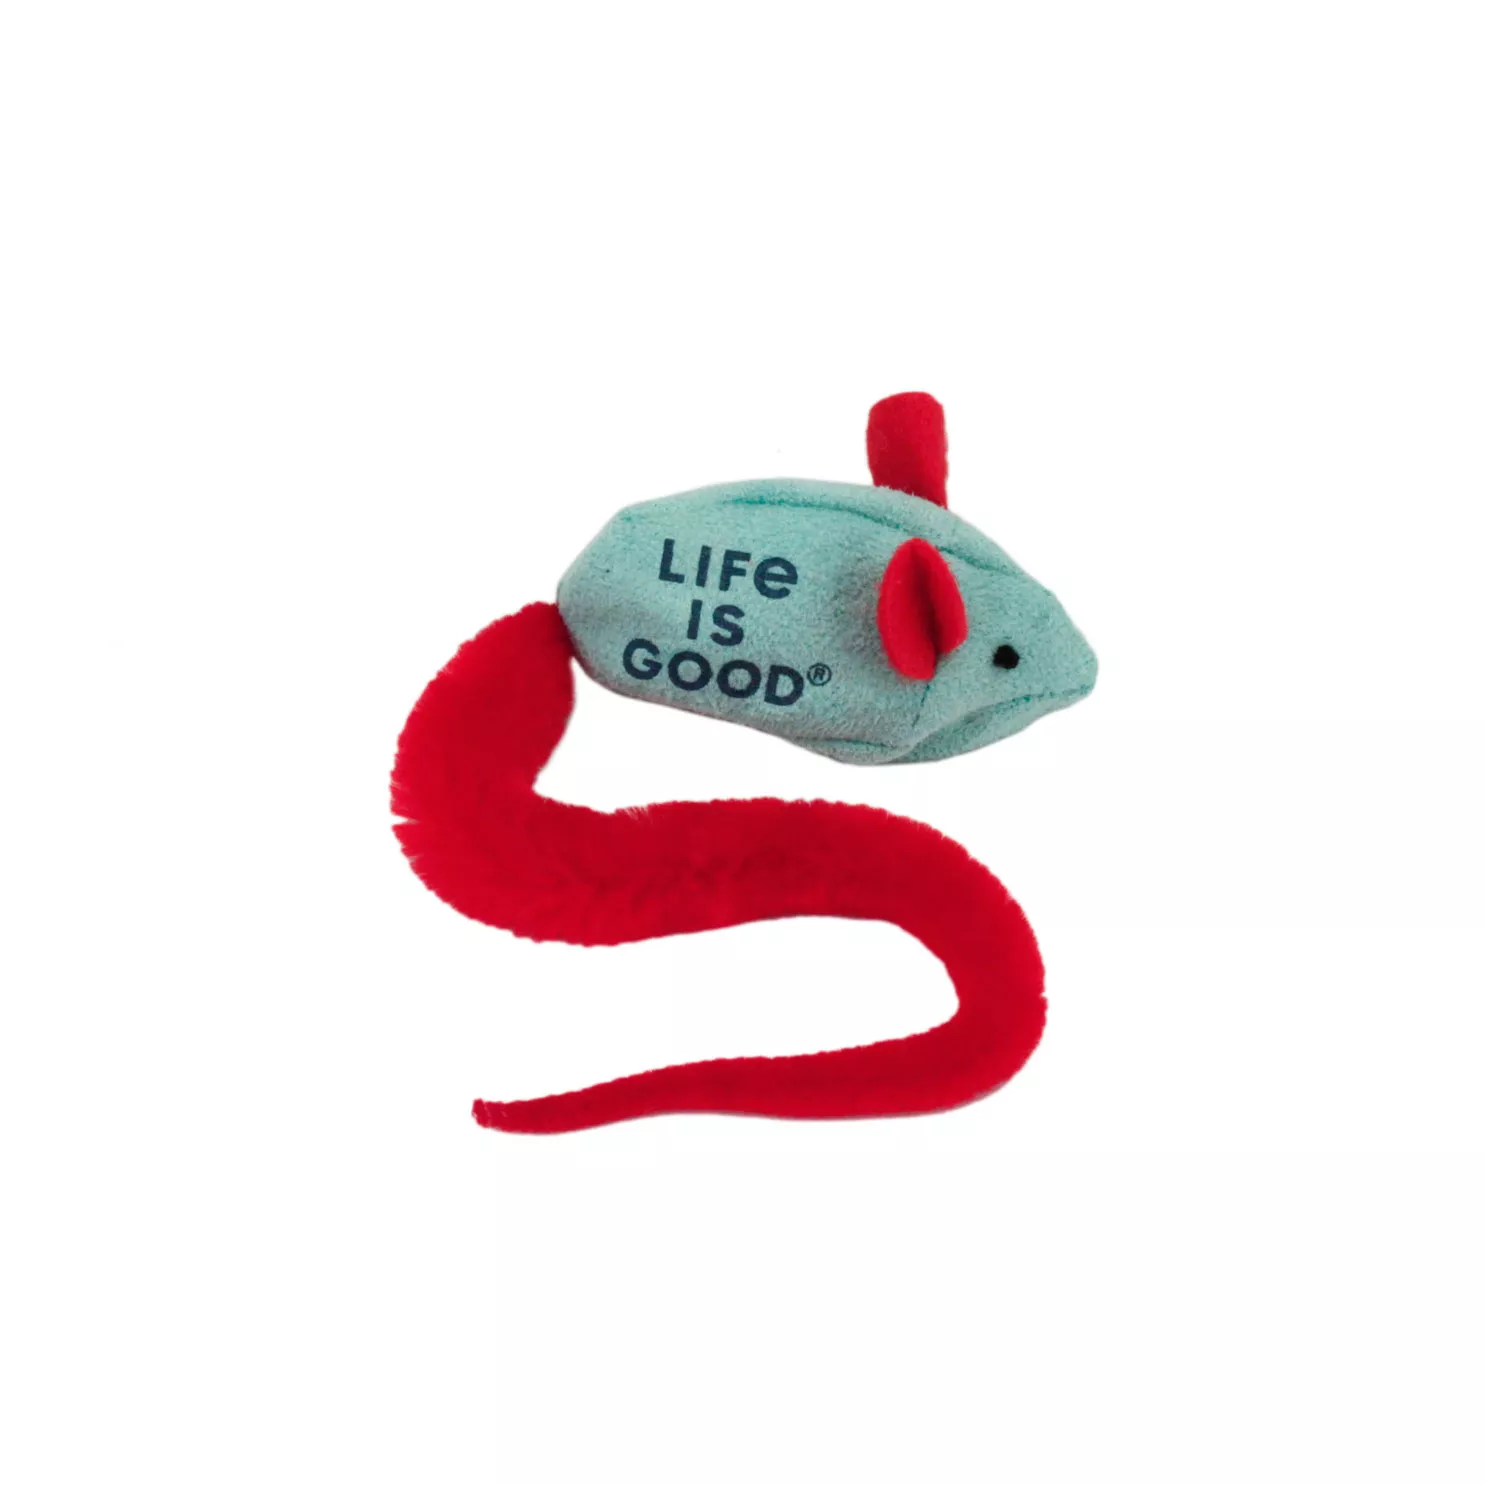 Life is Good® Catnip Mouse